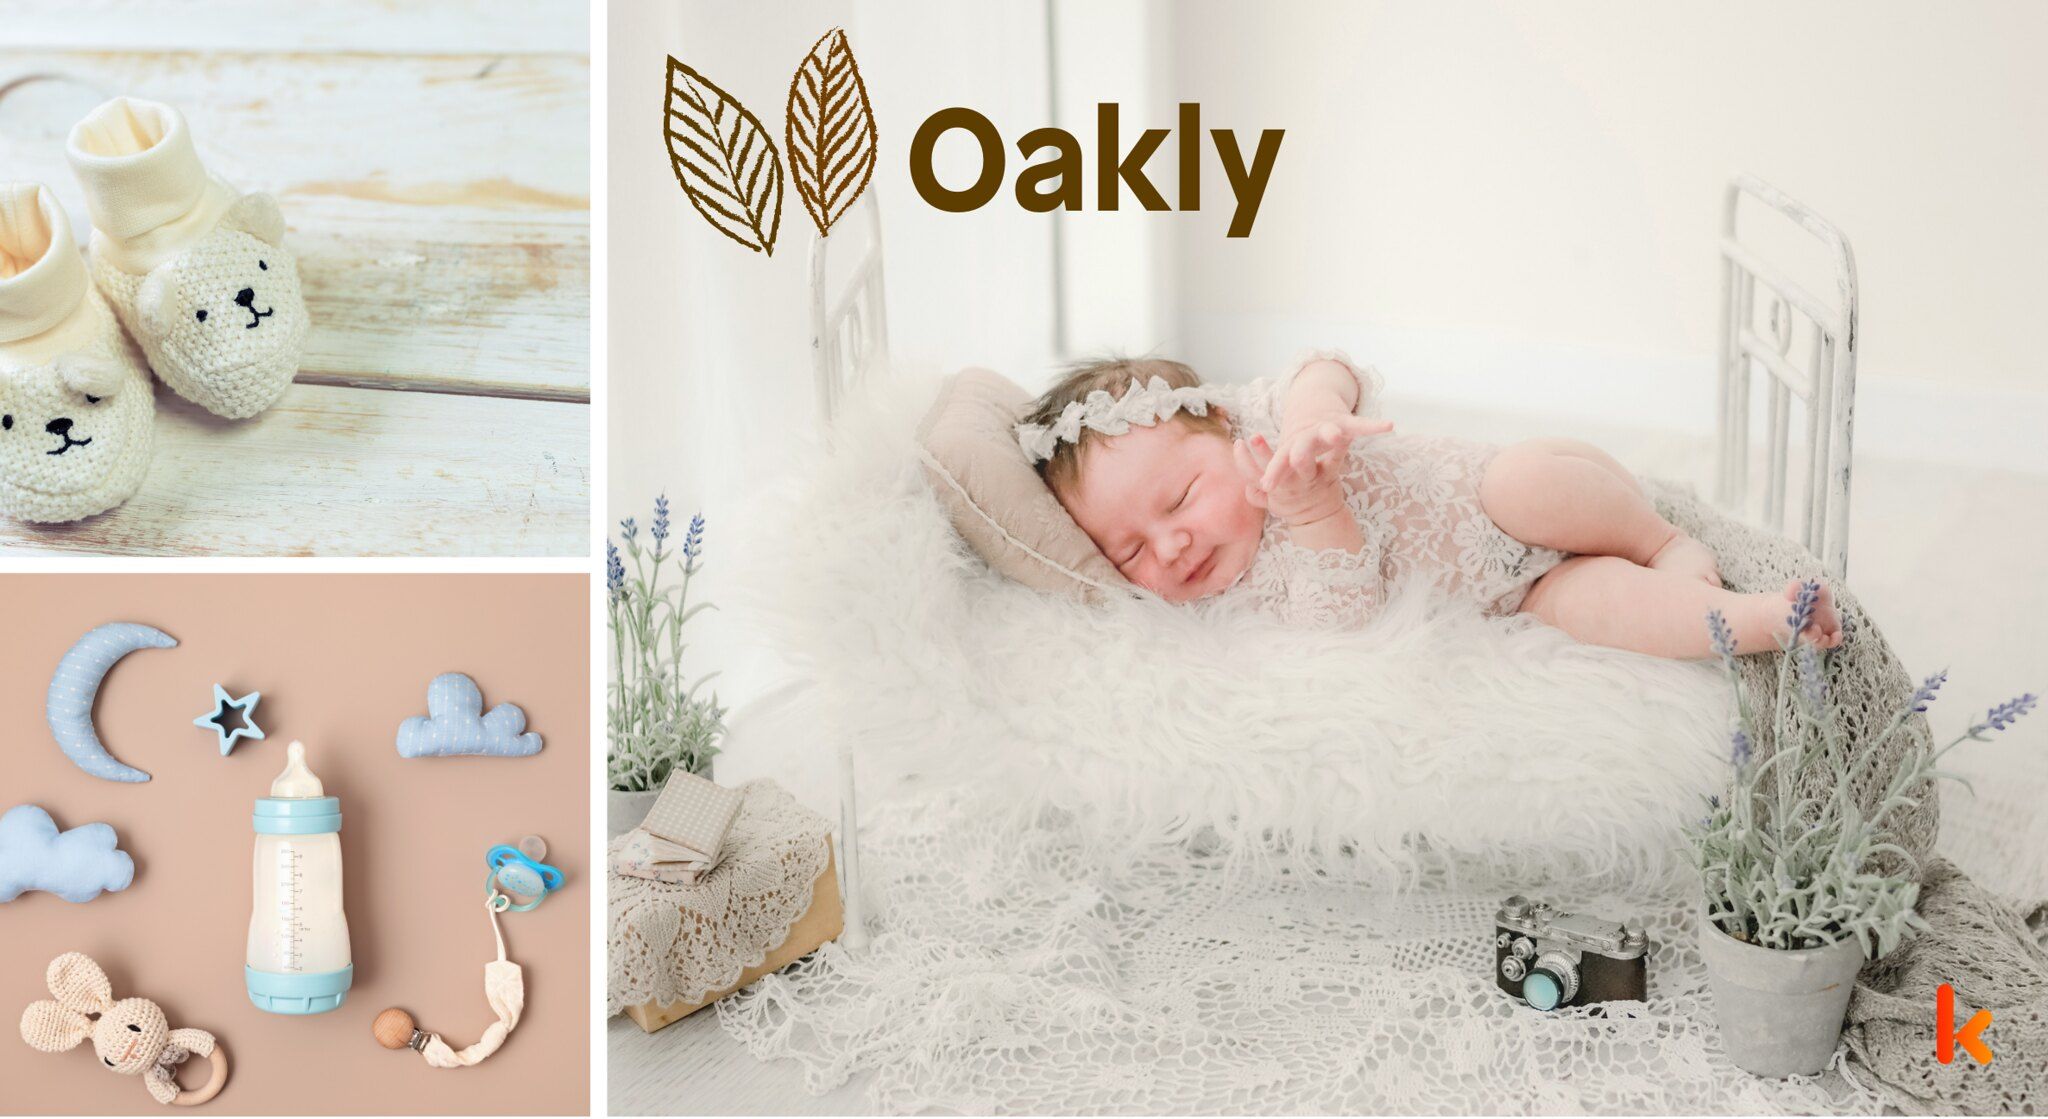 Meaning of the name Oakly